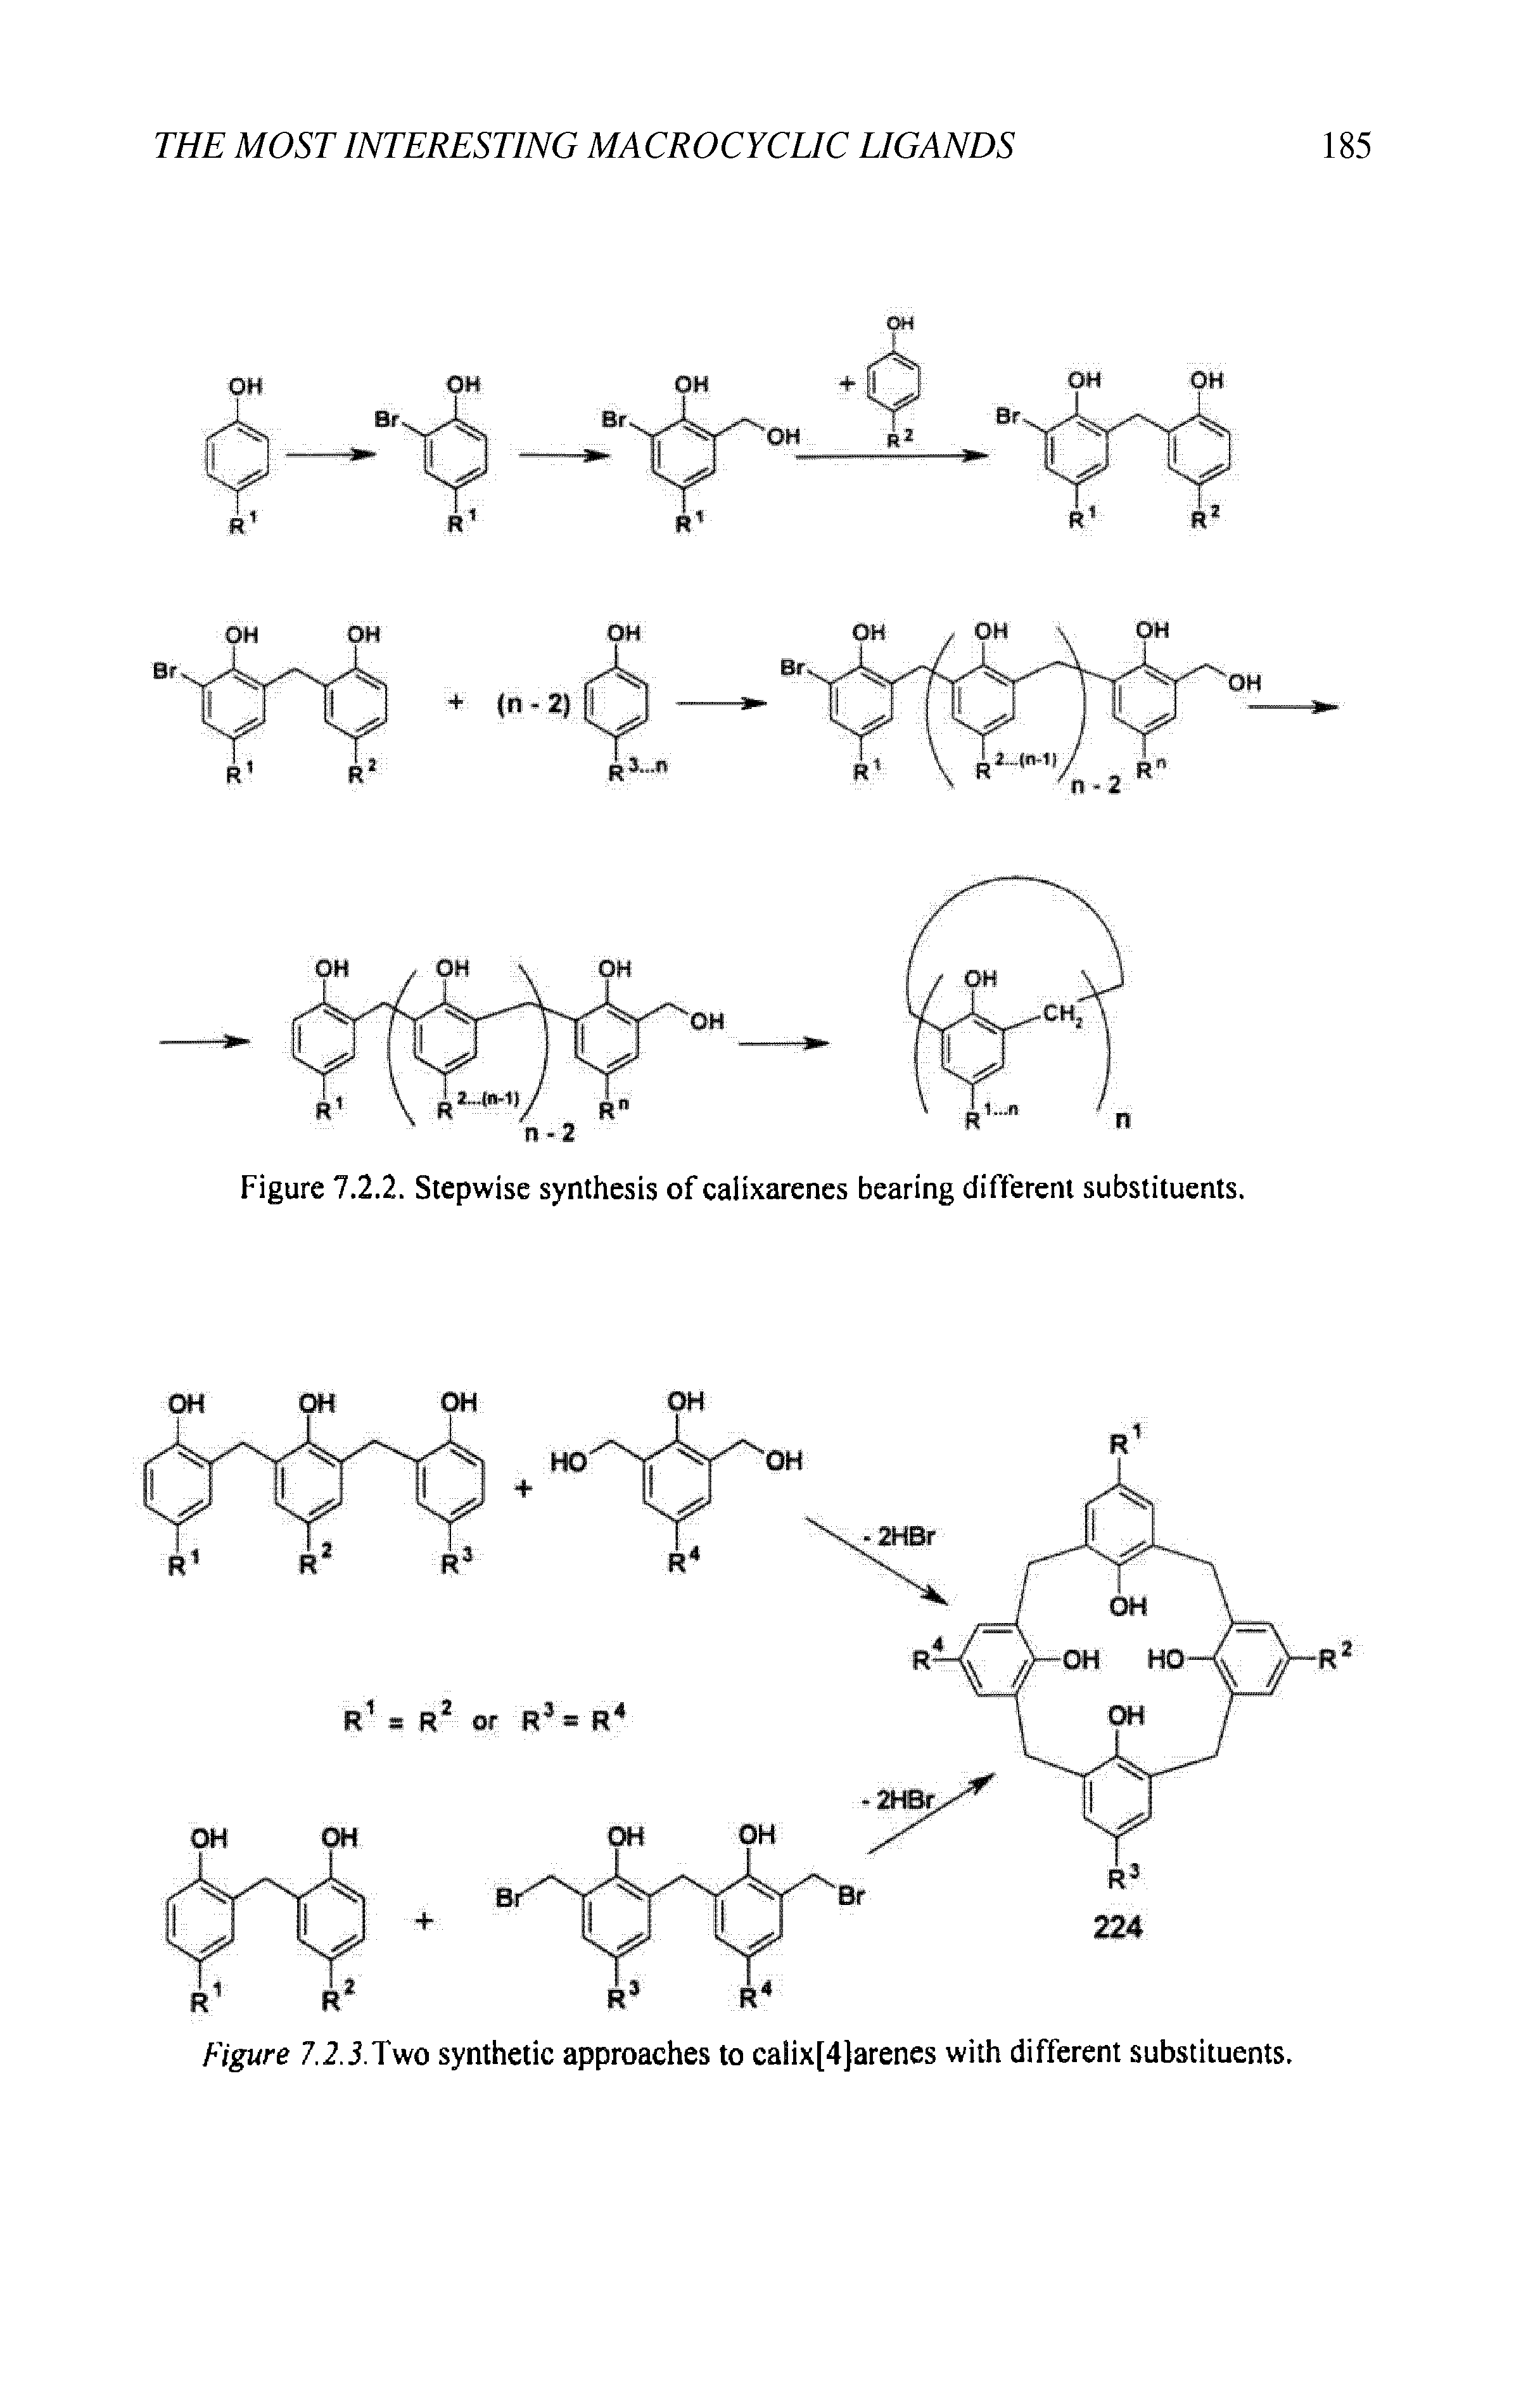 Figure 7.2.2. Stepwise synthesis of calixarenes bearing different substituents.